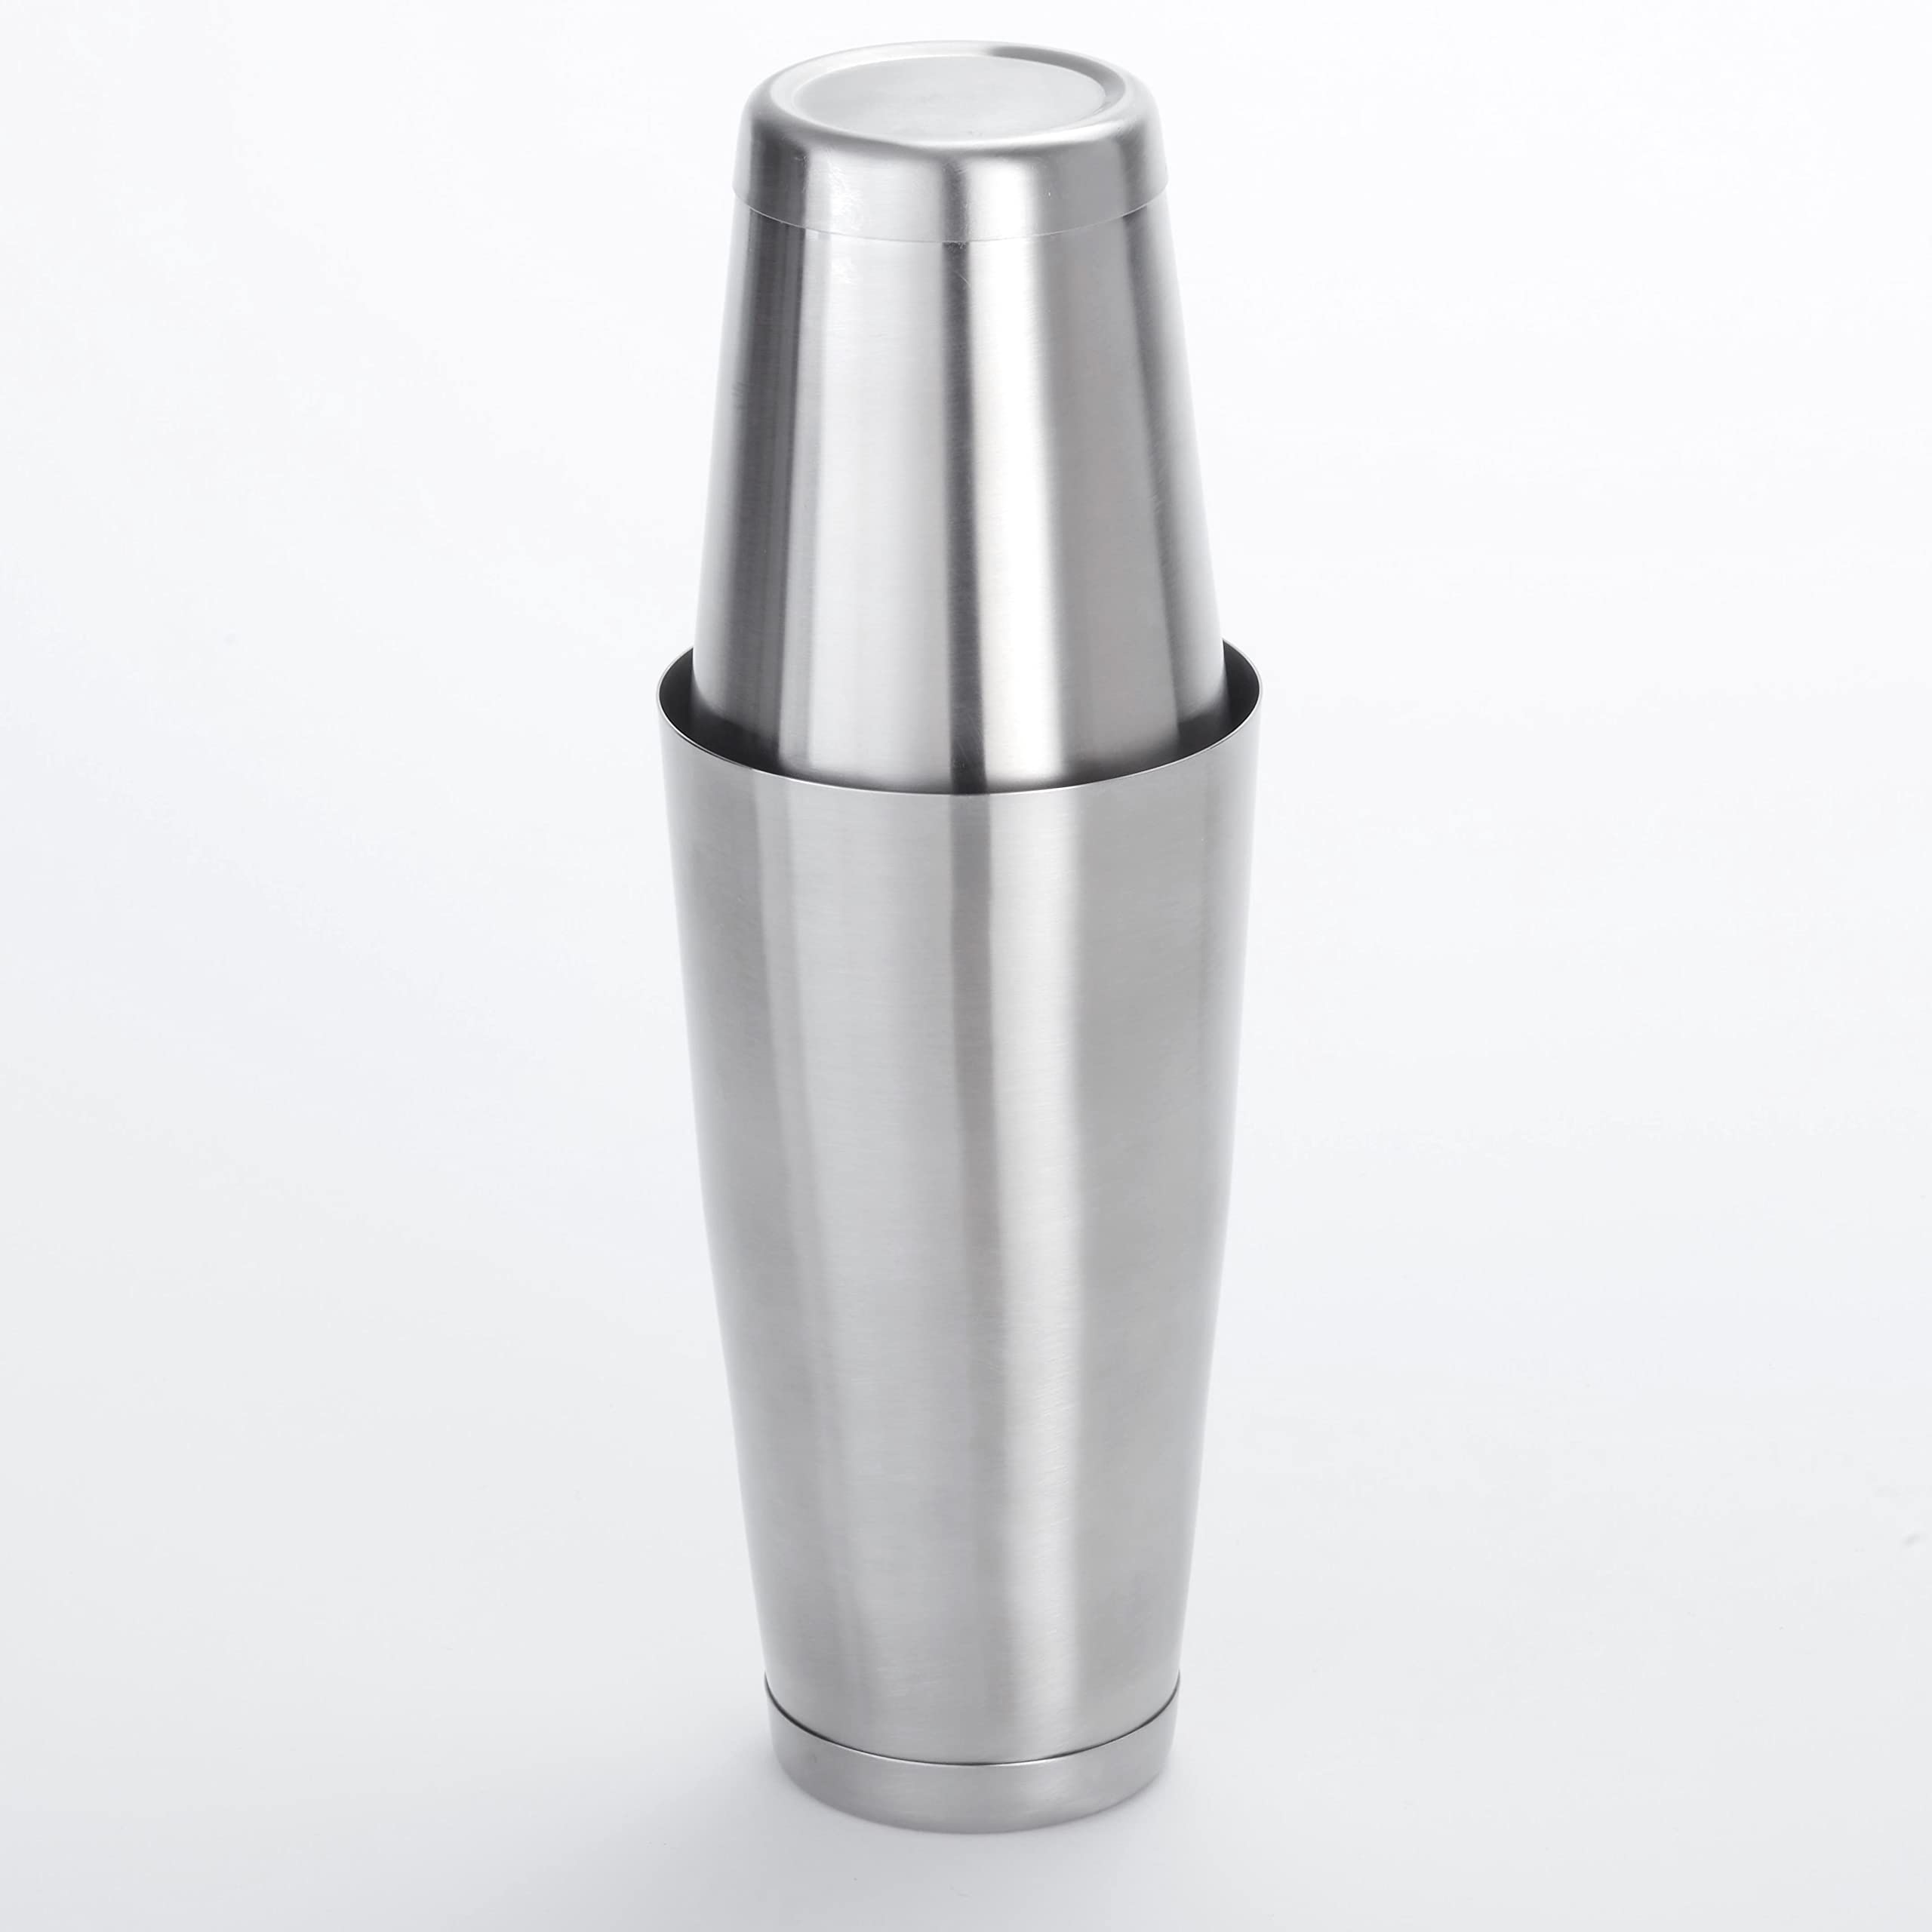 American Metalcraft BSSET Boston Shaker Set, Stainless Steel, Weighted, 18 oz. and 28 oz.